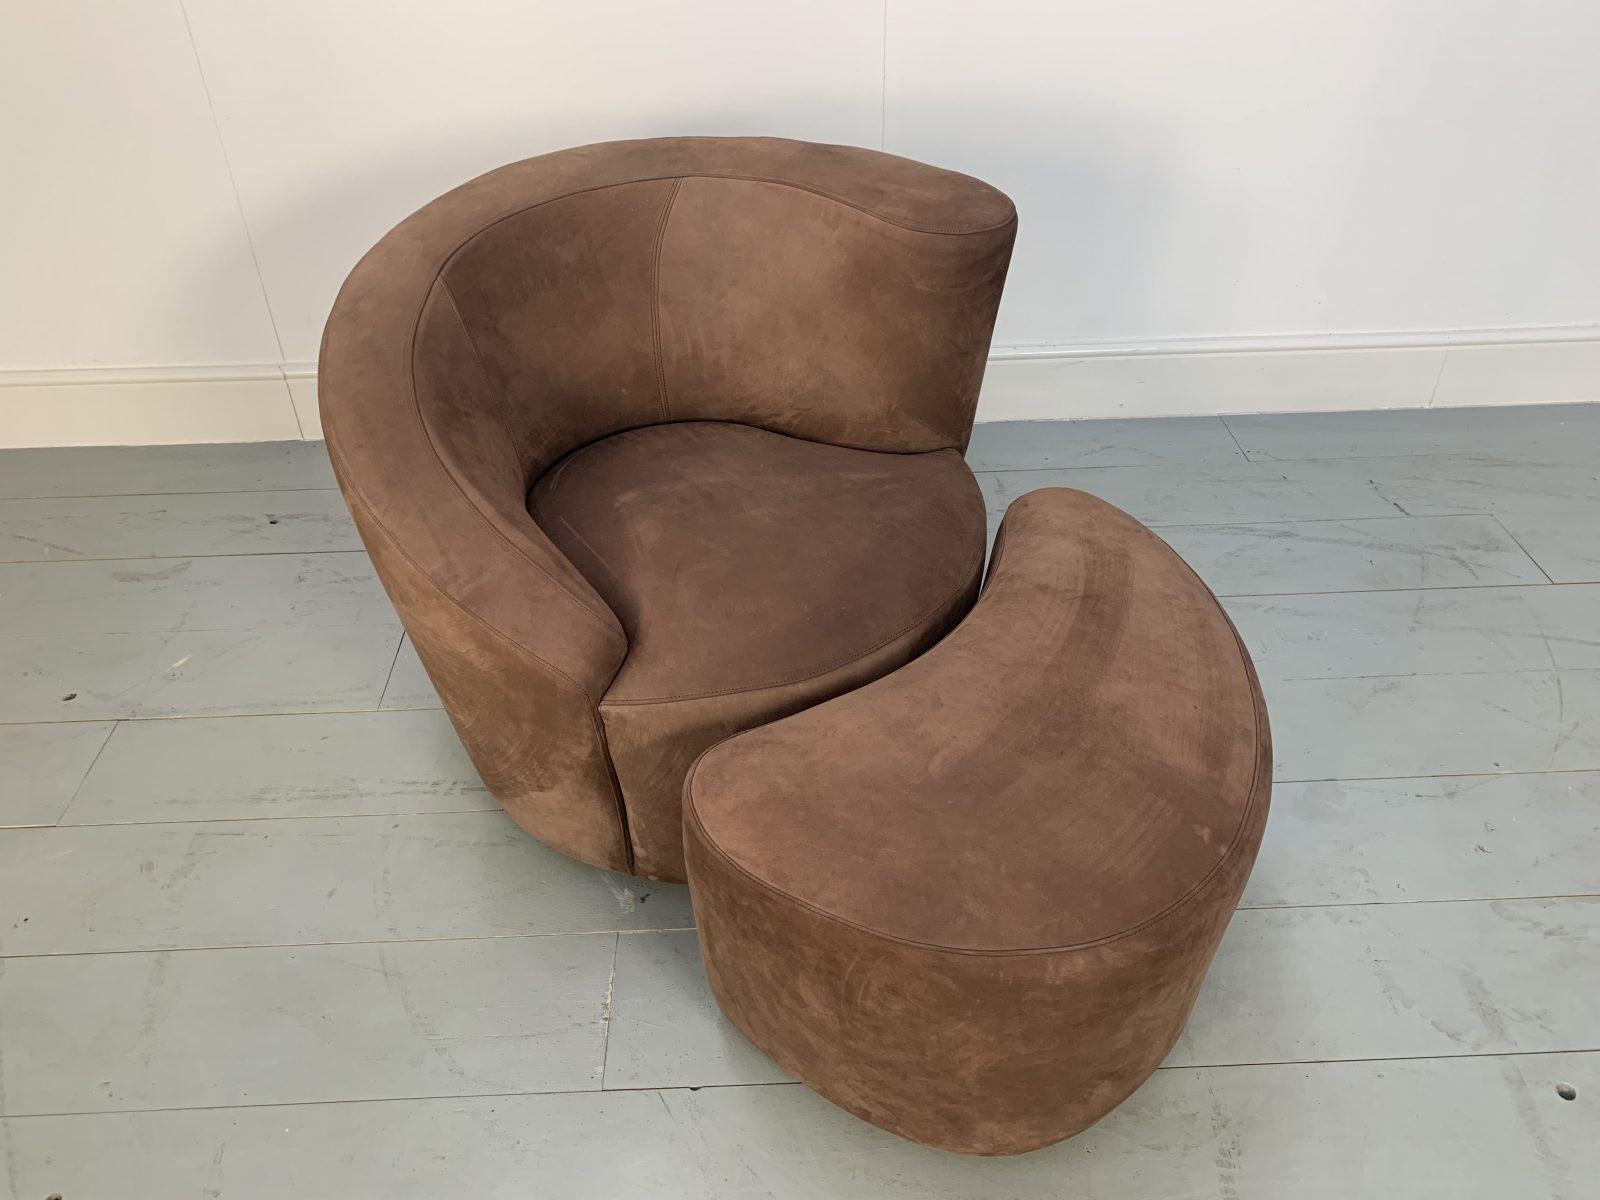 Superb Vladimir Kagan “Nautilus” Corkscrew Armchair and Footstool in Brown Ultra In Good Condition For Sale In Barrowford, GB